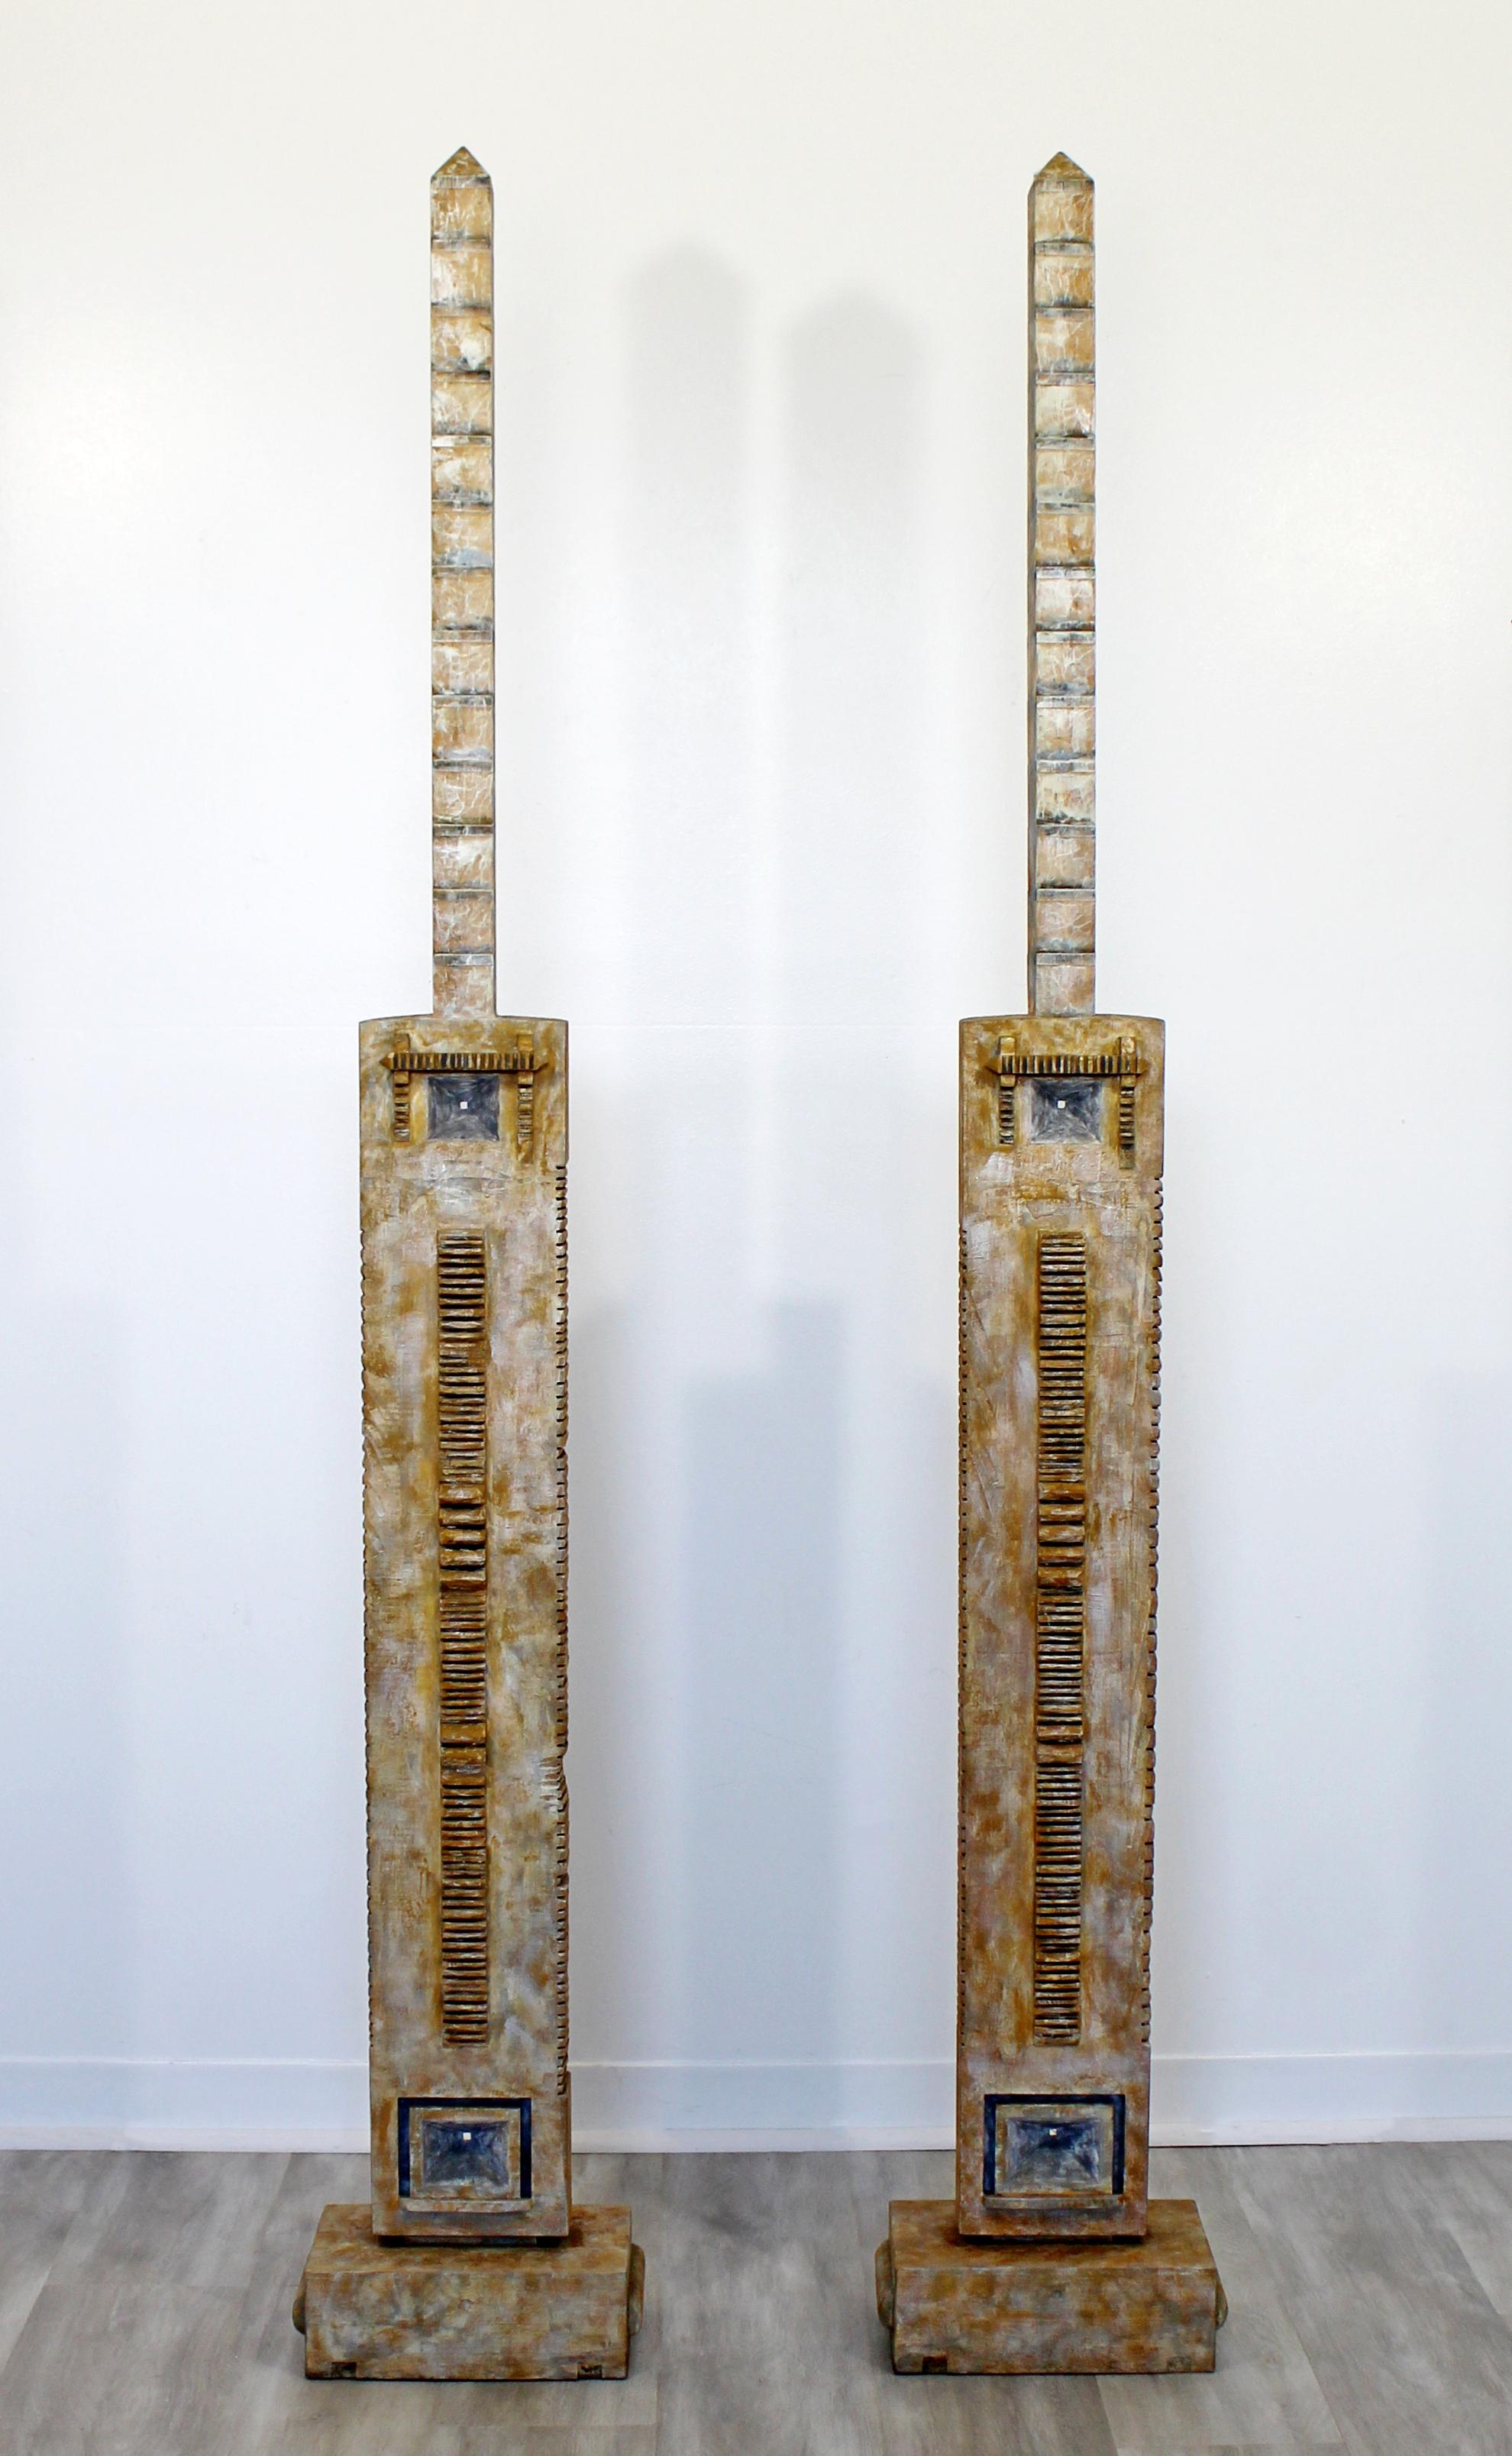 For your consideration is a beautiful pair of painted wooden floor sculptures, signed and dated by Kenji Umeda, 1990. In excellent condition. The dimensions of each are 12